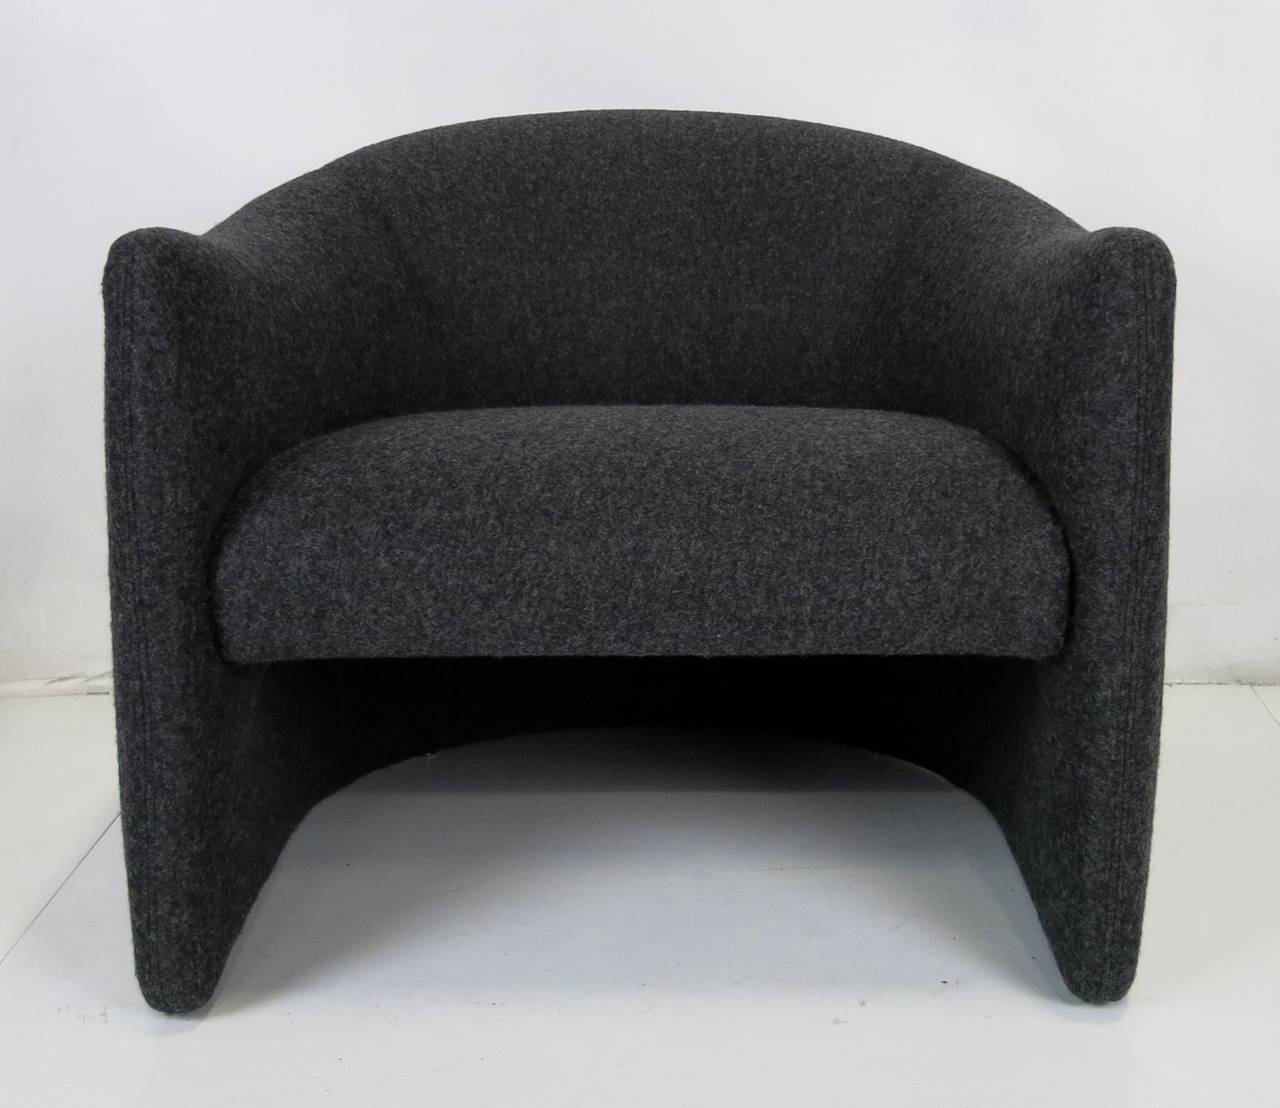 Pair of Sculptural Modern Lounge Chairs freshly upholstered in heavy weight 100% Wool/Cashmere suiting flannel.  These chairs are amply scaled and dangerously comfortable....a super stylish pair.  